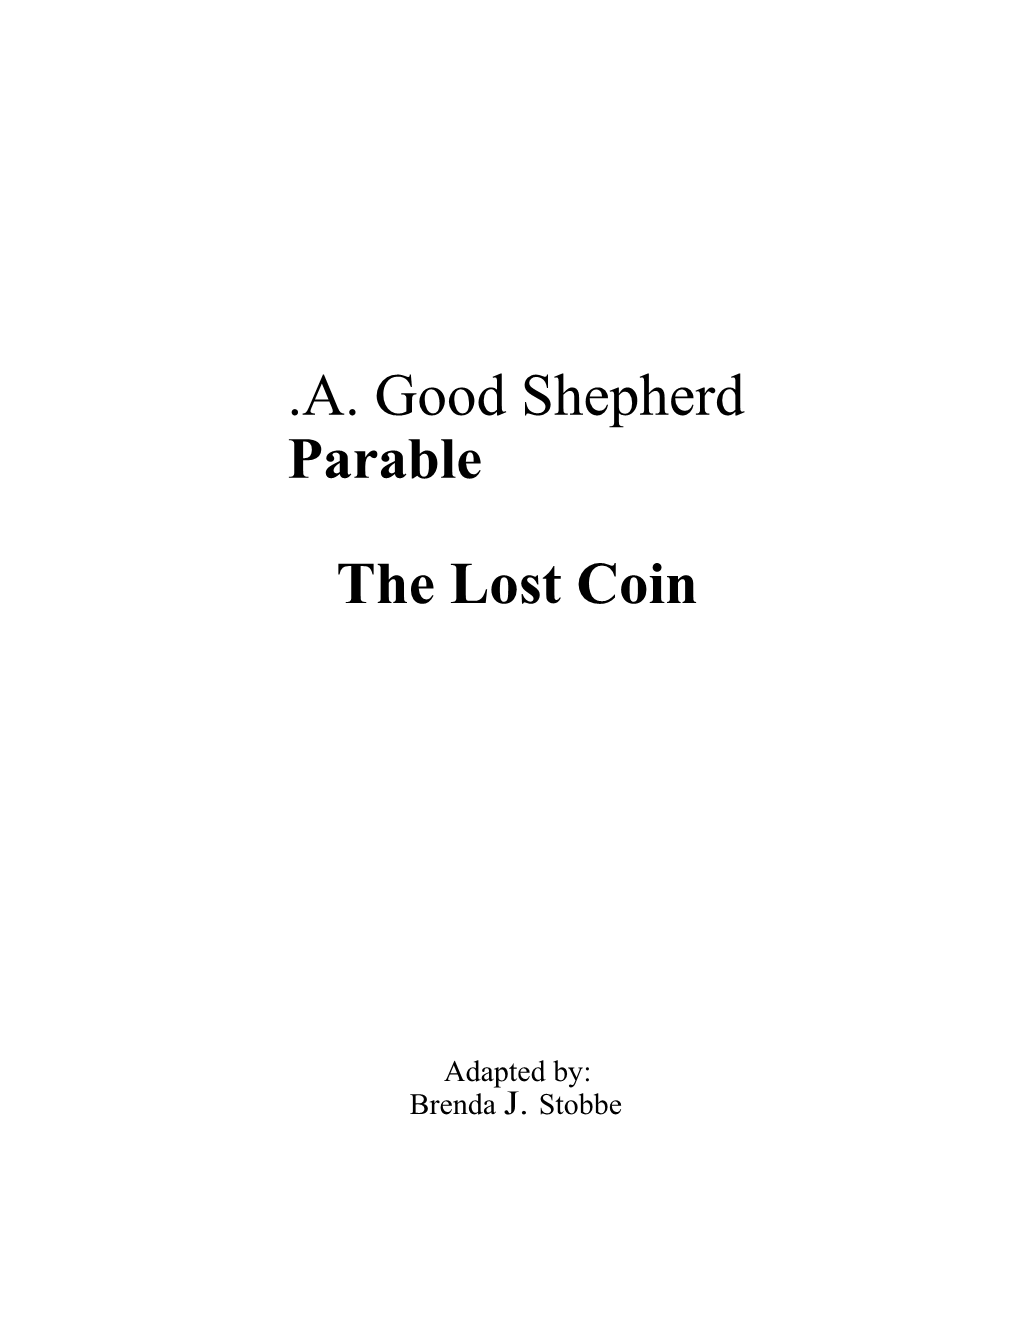 A. Good Shepherd the Lost Coin